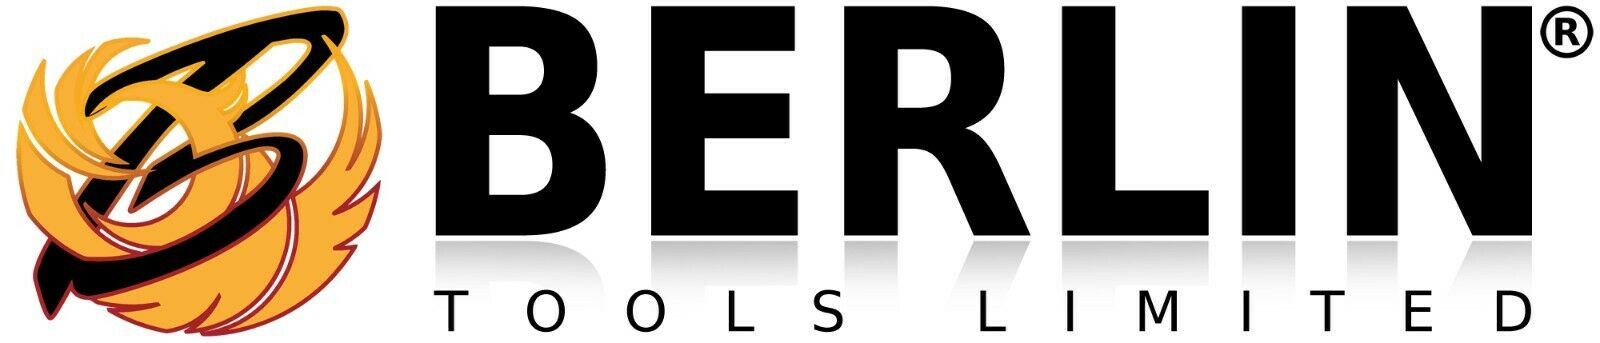 BERLIN TOOLS LIMITED Logo With Registered Mark And Phoenix Emblem